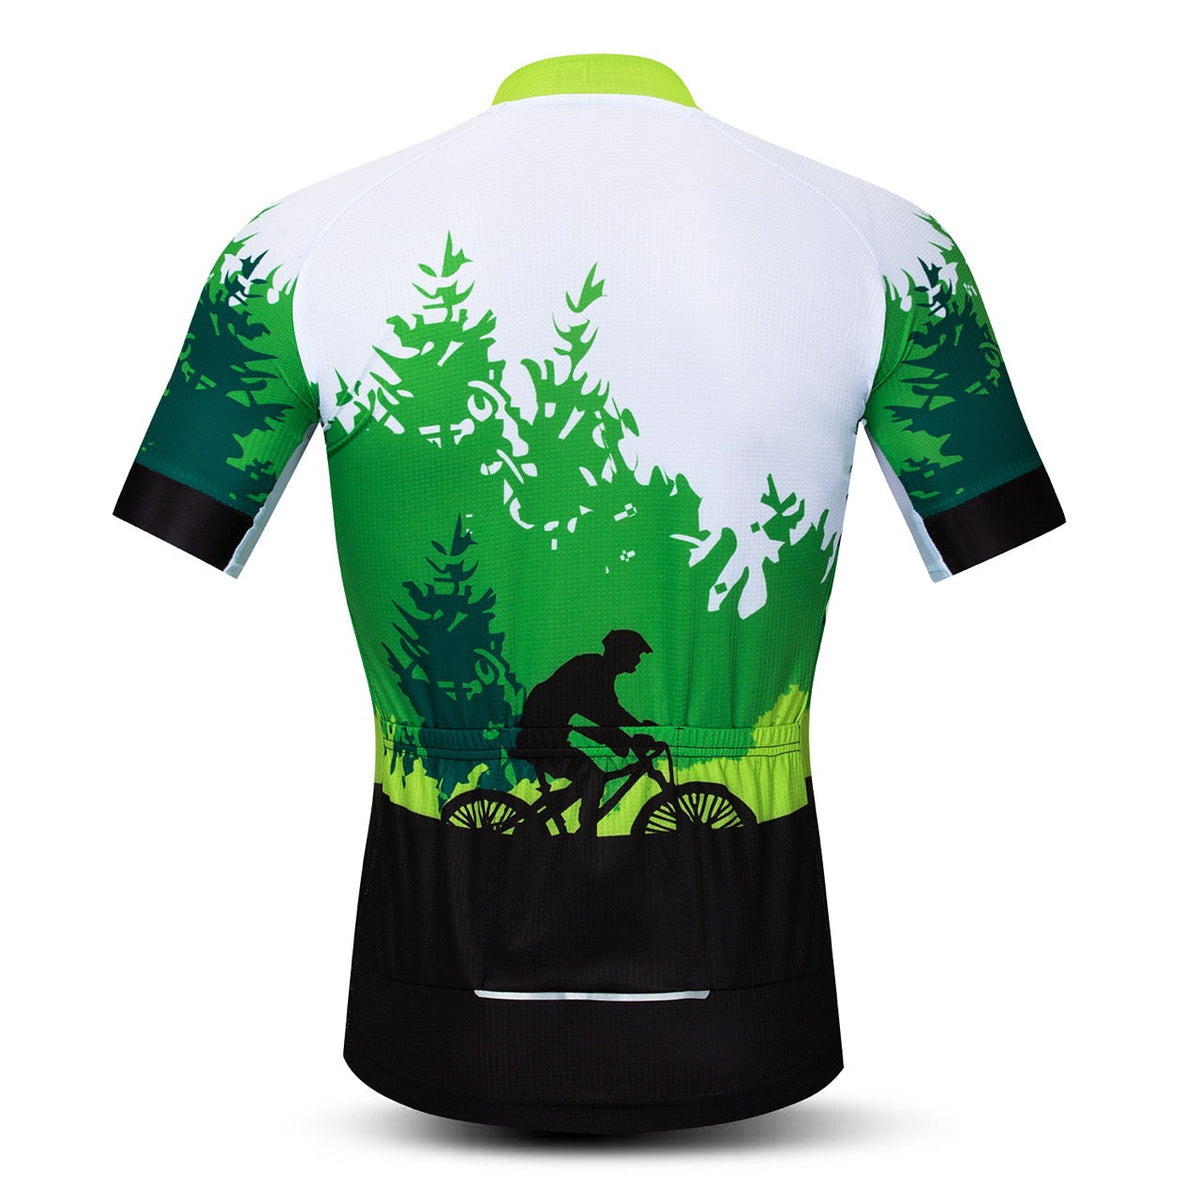 Green Forest Riding | Men's Short Sleeve Cycling Jersey